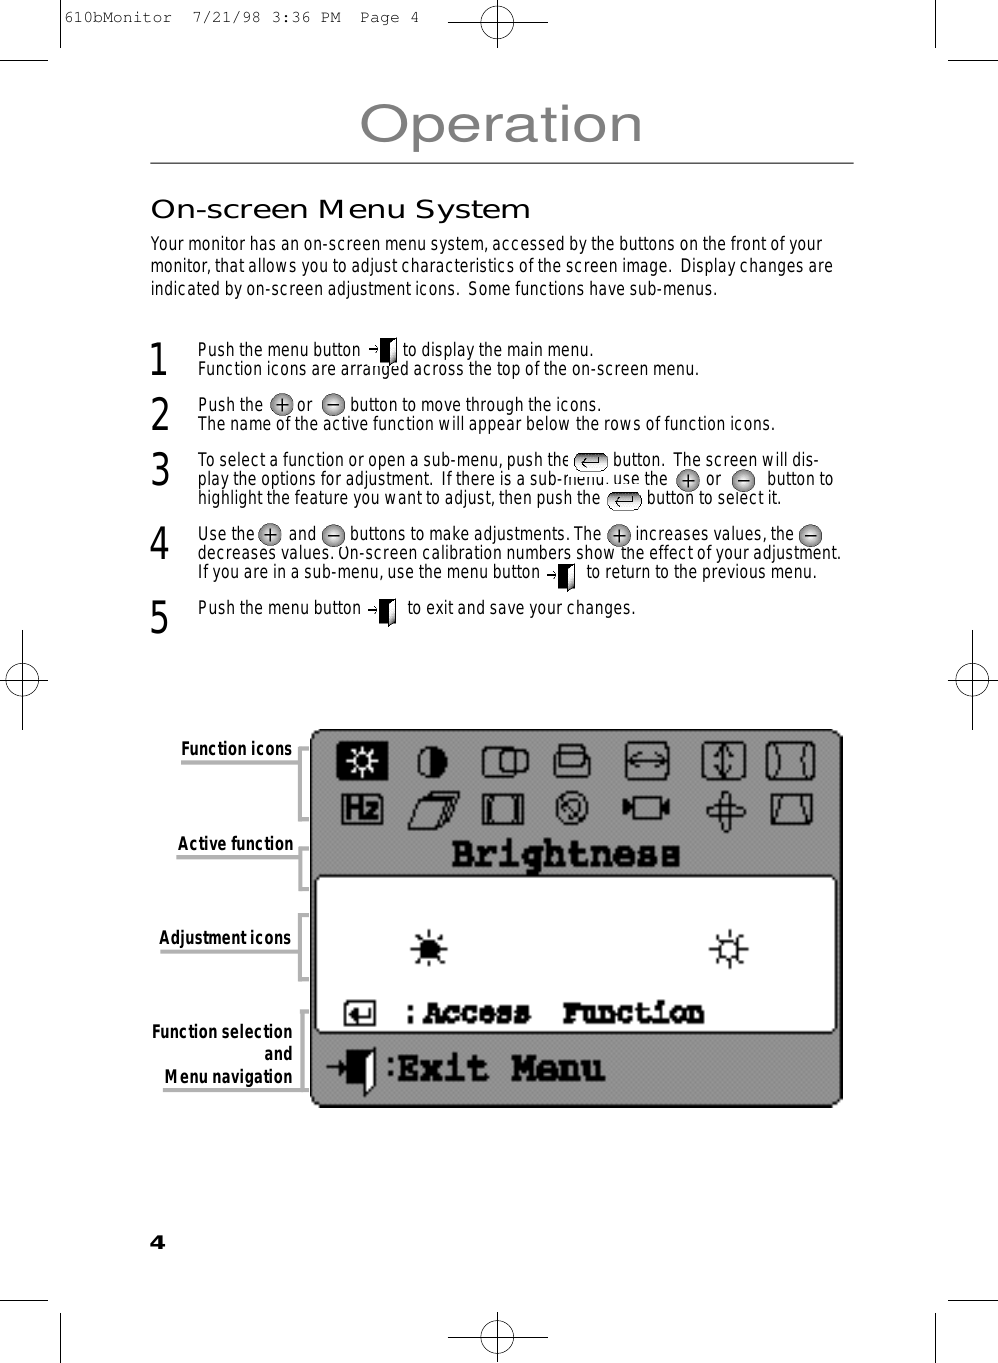 OperationOn-screen Menu SystemYour monitor has an on-screen menu system, accessed by the buttons on the front of yourmonitor, that allows you to adjust characteristics of the screen image.  Display changes areindicated by on-screen adjustment icons.  Some functions have sub-menus.  1  Push the menu button          to display the main menu. Function icons are arranged across the top of the on-screen menu.2  Push the        or         button to move through the icons. The name of the active function will appear below the rows of function icons.  3  To select a function or open a sub-menu, push the          button.  The screen will dis-play the options for adjustment.  If there is a sub-menu, use the         or           button tohighlight the feature you want to adjust, then push the           button to select it. 4  Use the        and        buttons to make adjustments. The        increases values, thedecreases values. On-screen calibration numbers show the effect of your adjustment.If you are in a sub-menu, use the menu button           to return to the previous menu. 5Push the menu button           to exit and save your changes. Function iconsAdjustment iconsActive function Function selection and Menu navigation4610bMonitor  7/21/98 3:36 PM  Page 4